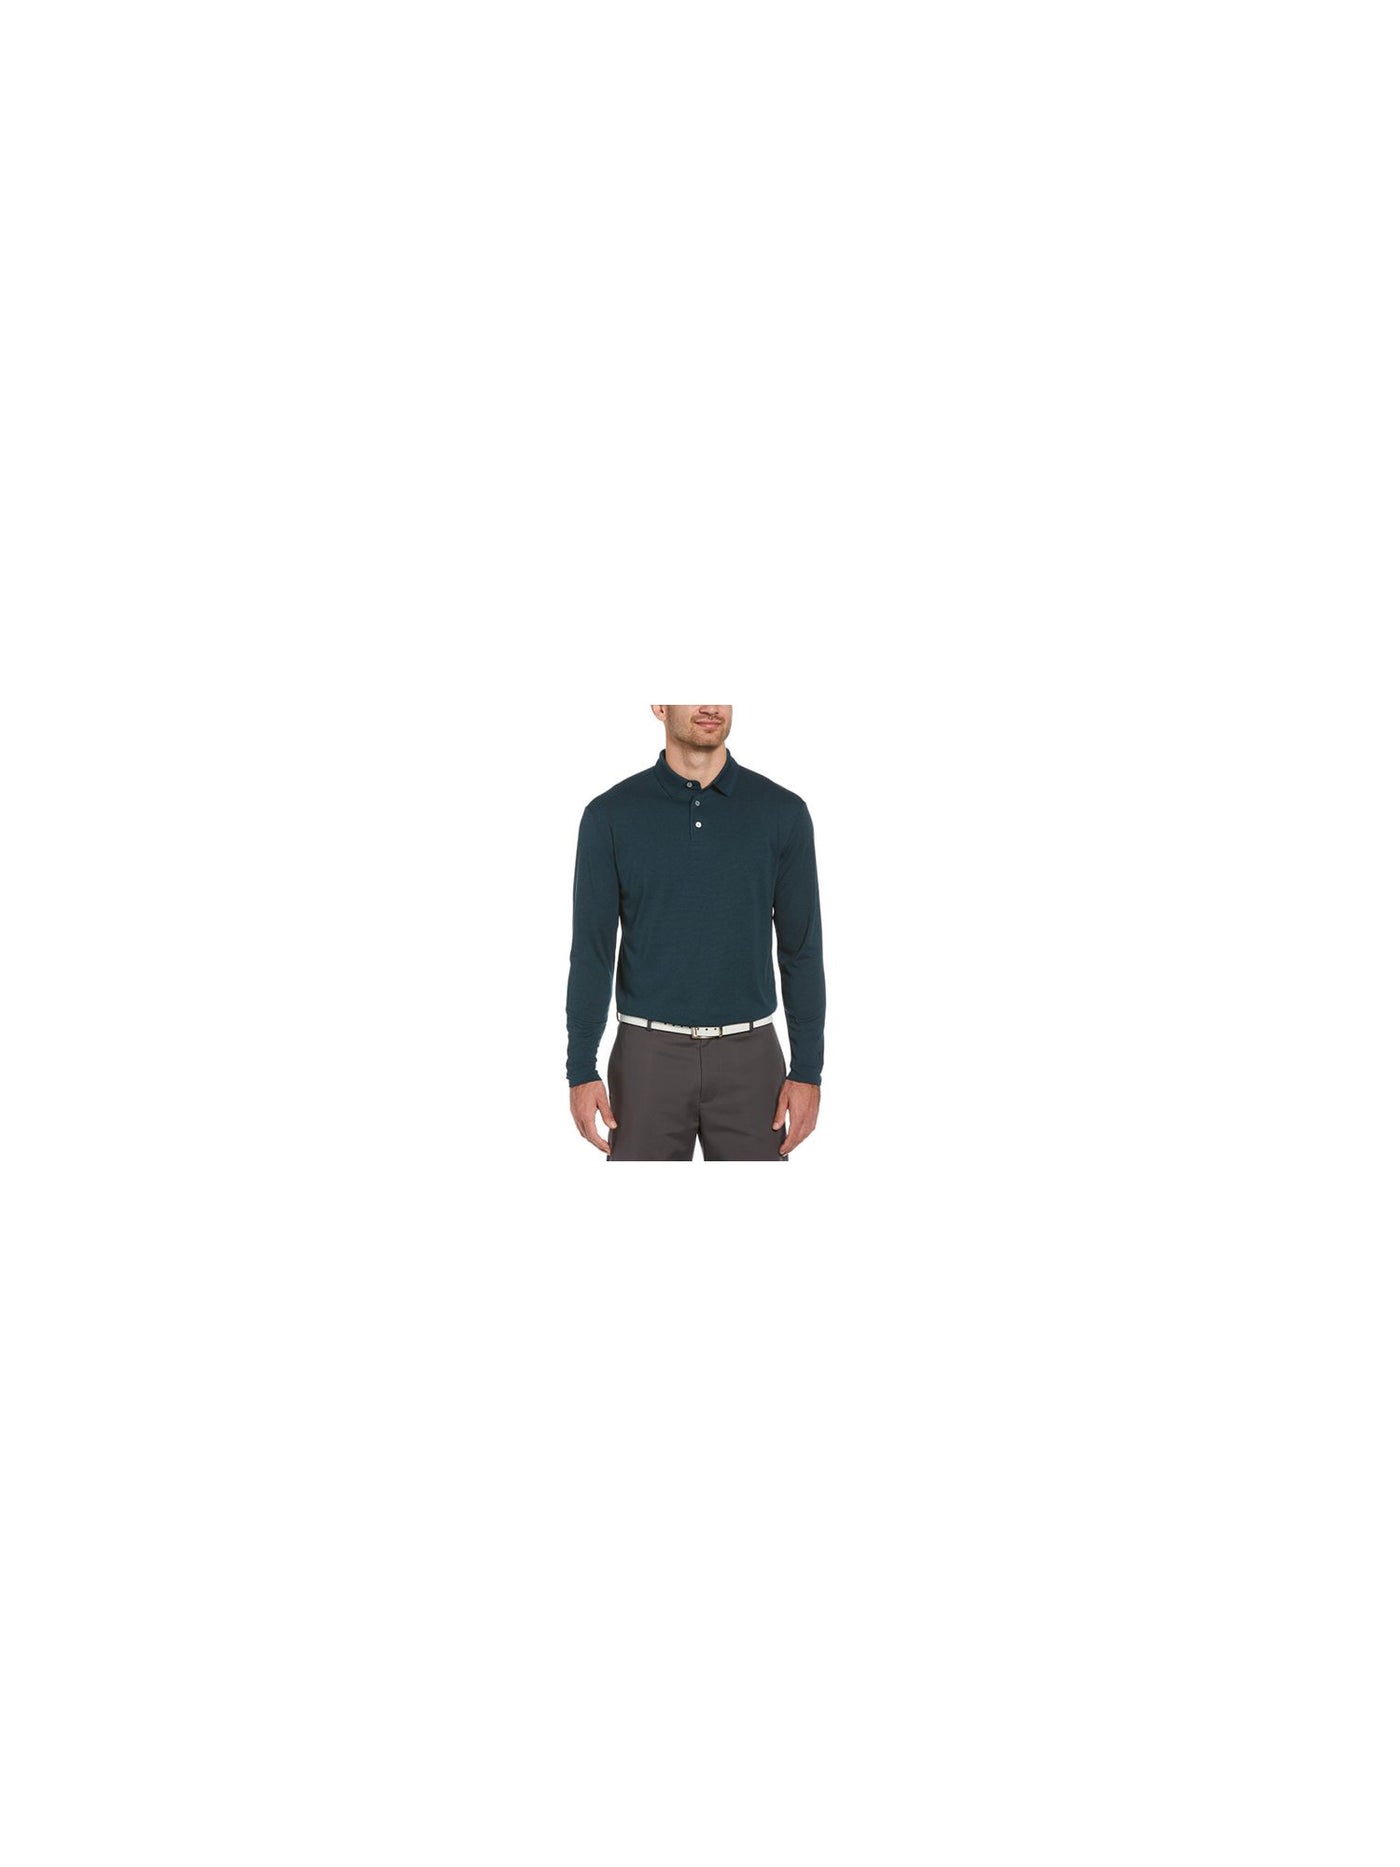 HYBRID APPAREL Mens Teal Classic Fit Polo XXL